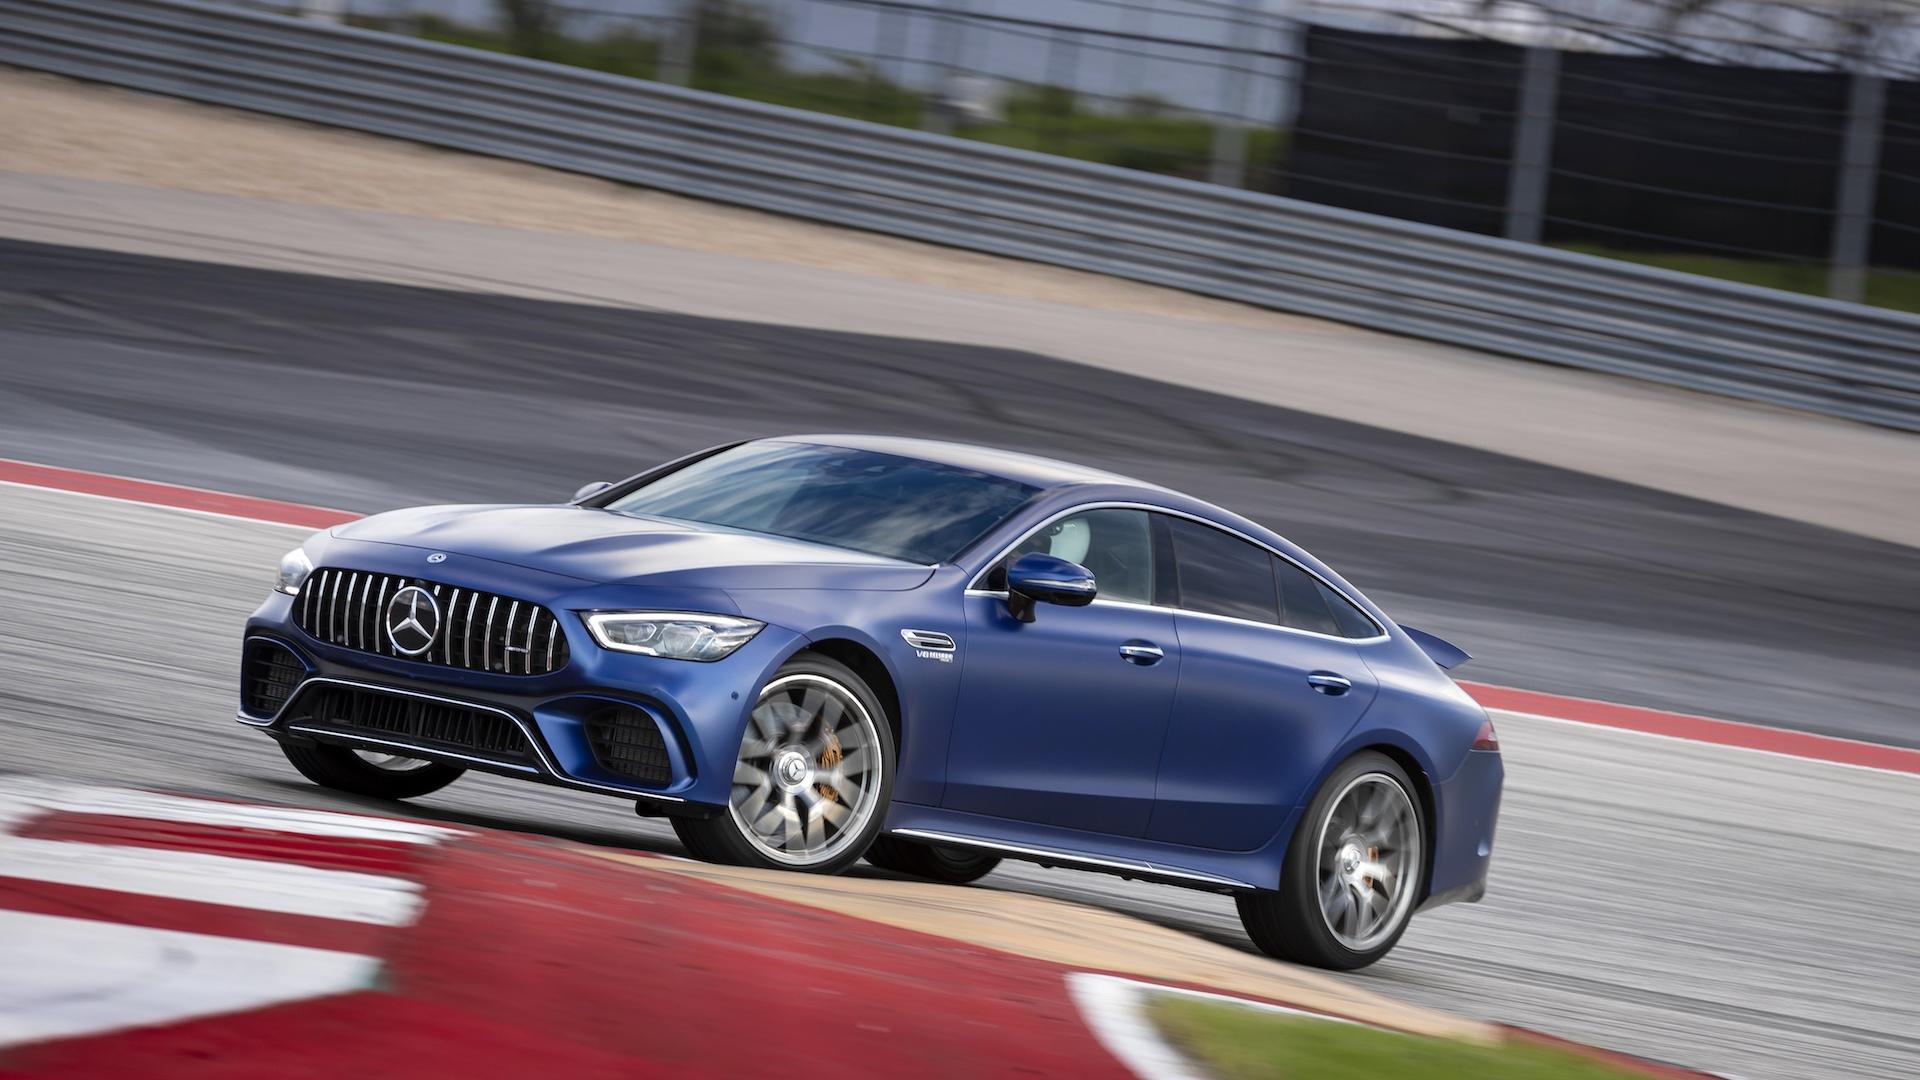 Mercedes AMG GT 63 S 4 Door Coupe First Drive Review